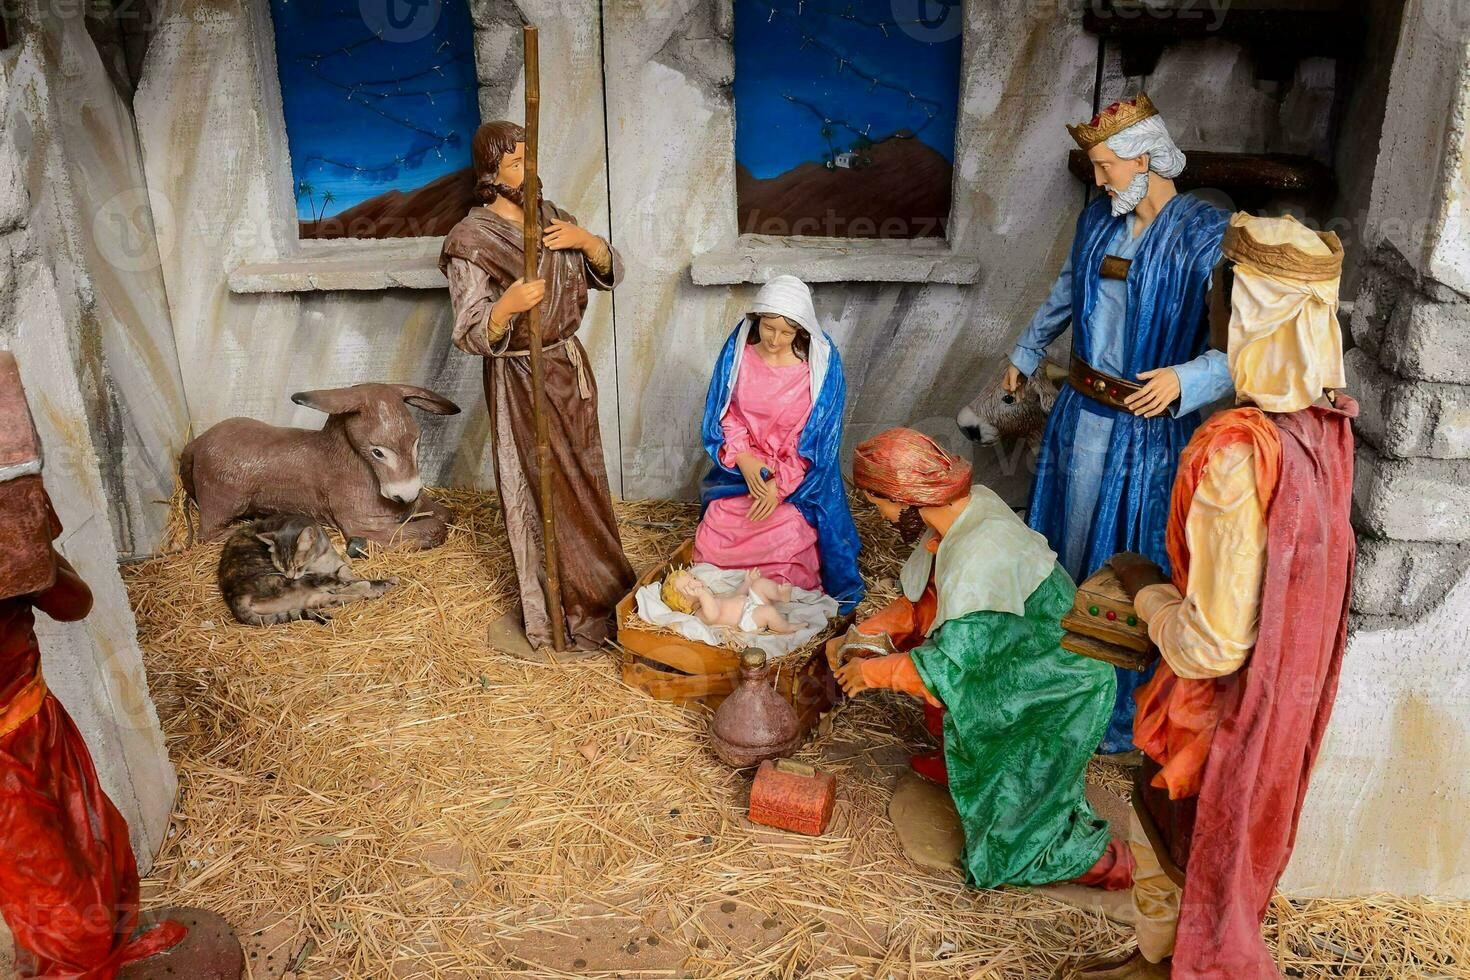 a nativity scene with a manger, a manger, and a sheep photo